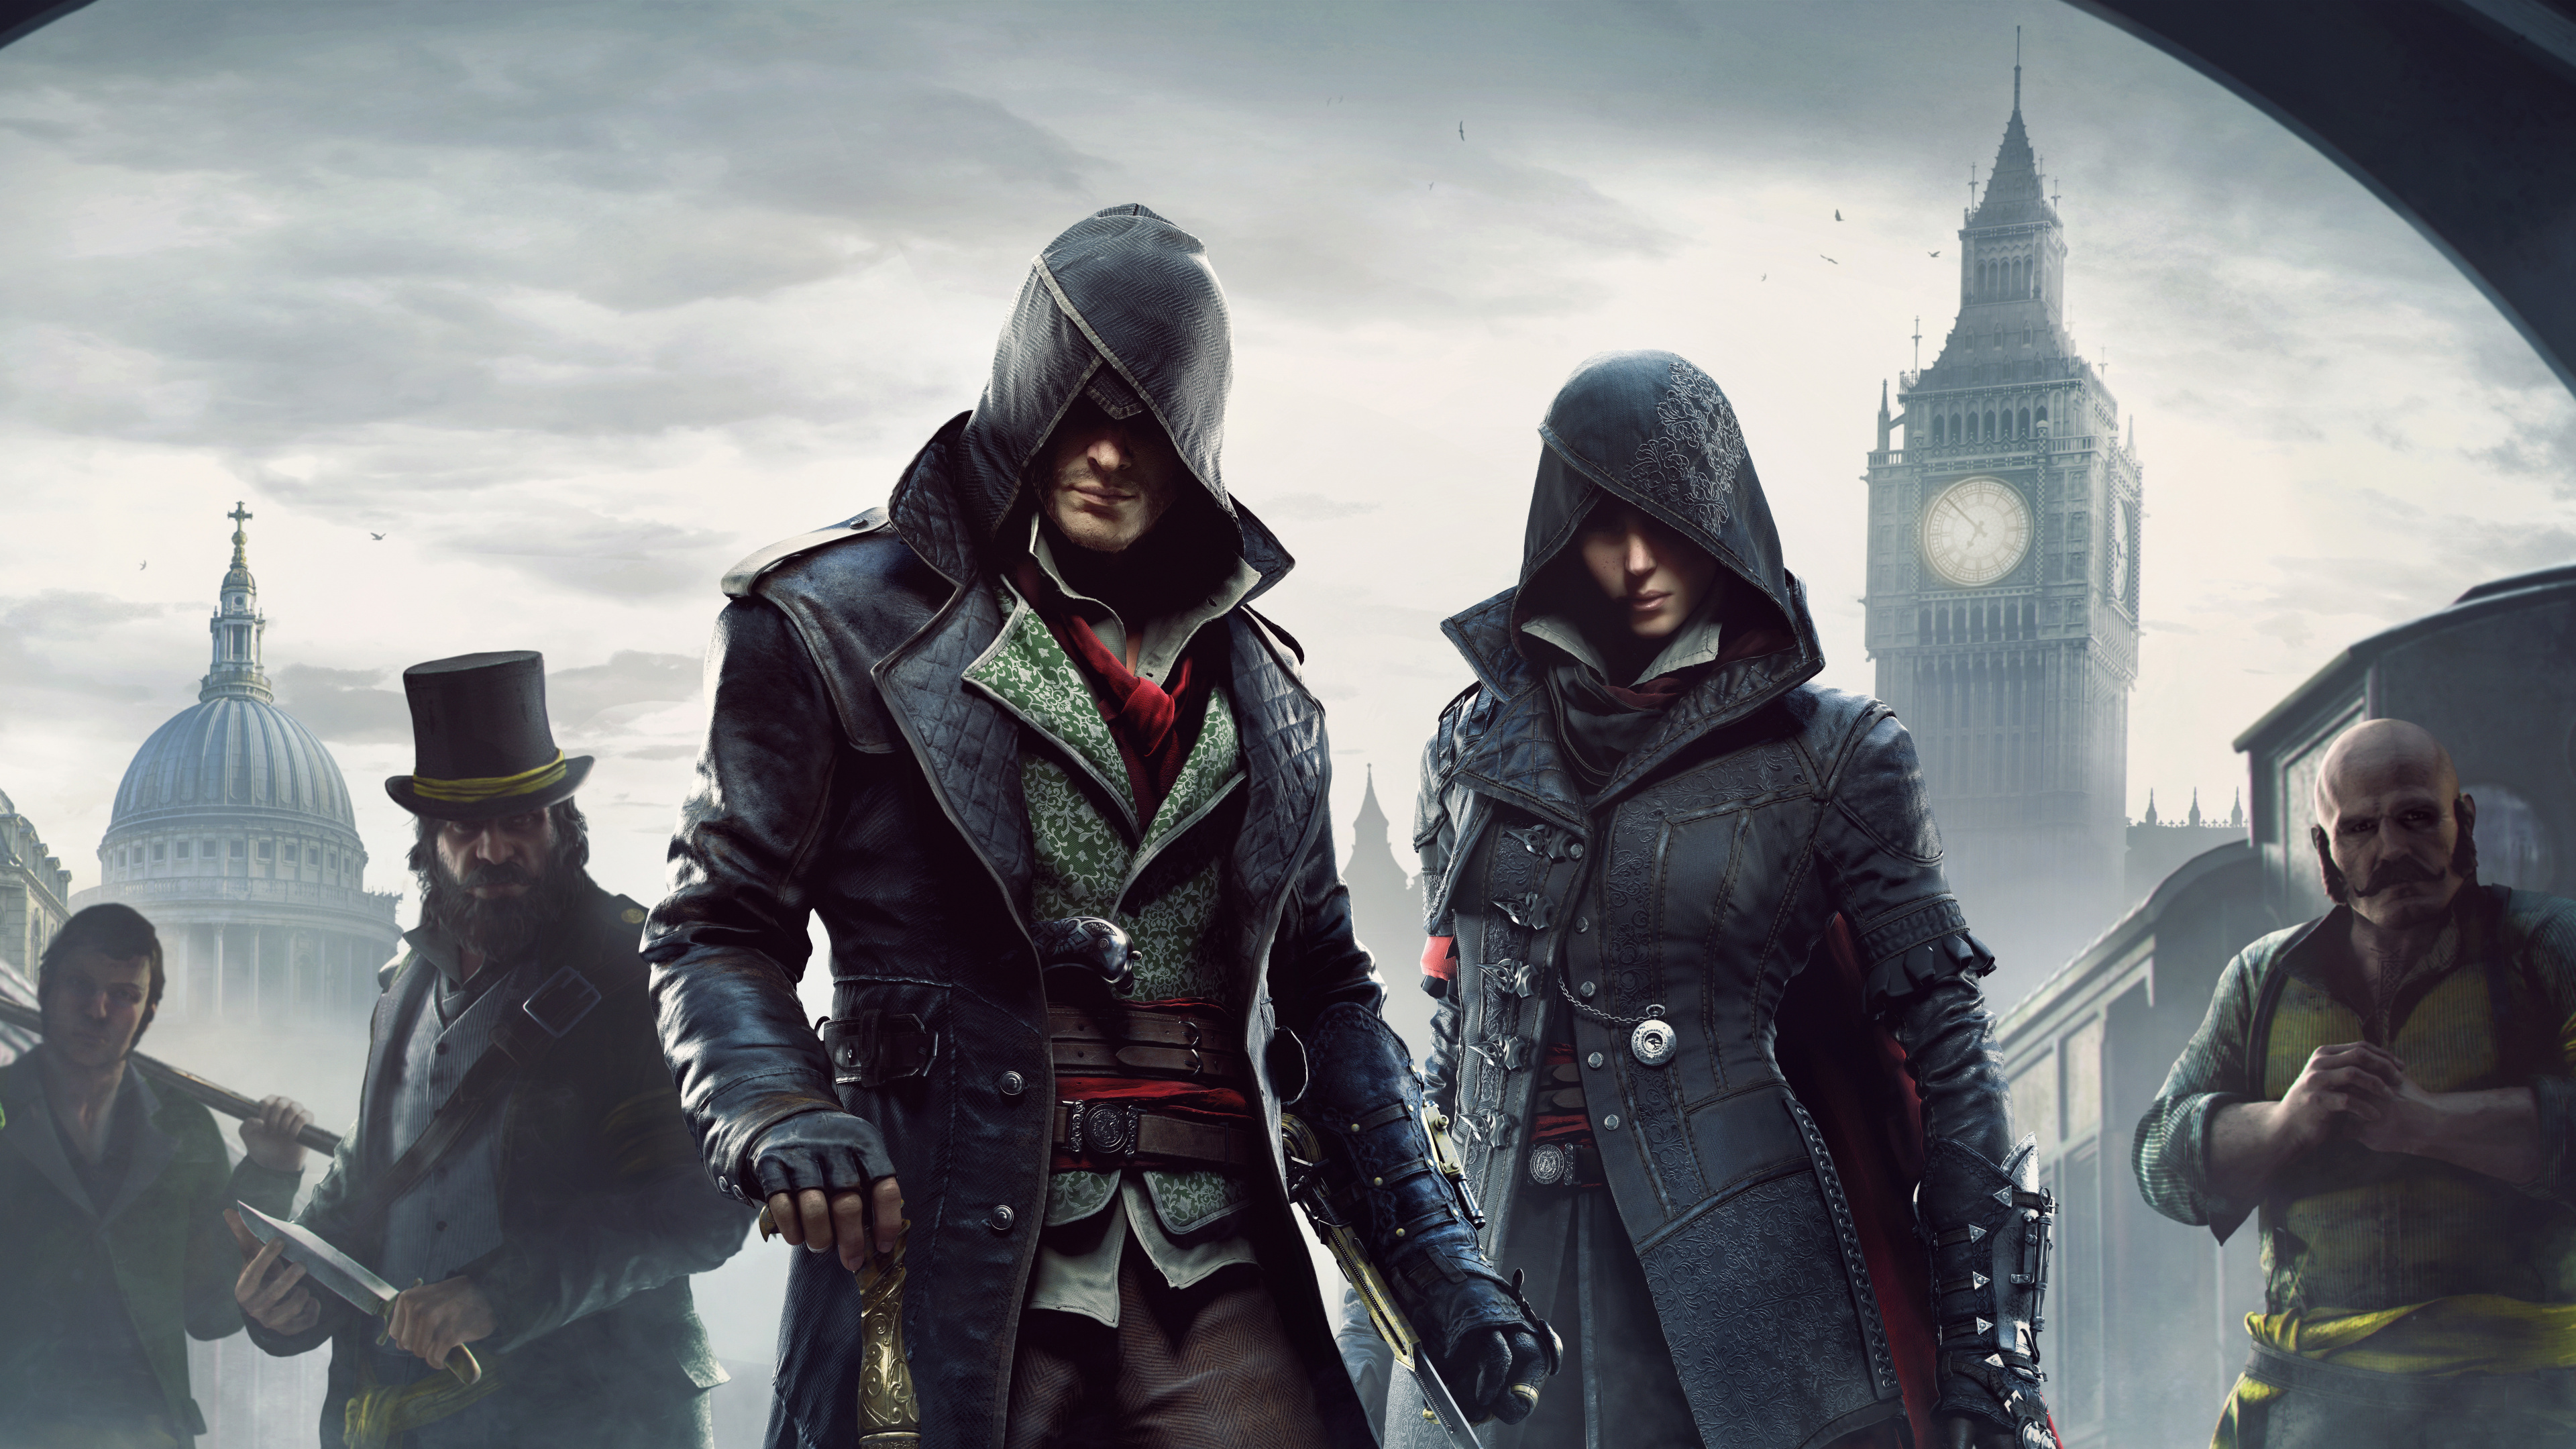 Assassins Creed Syndicate, Ubisoft, Pc-Spiel, Film, Assassins Creed Unity. Wallpaper in 3840x2160 Resolution